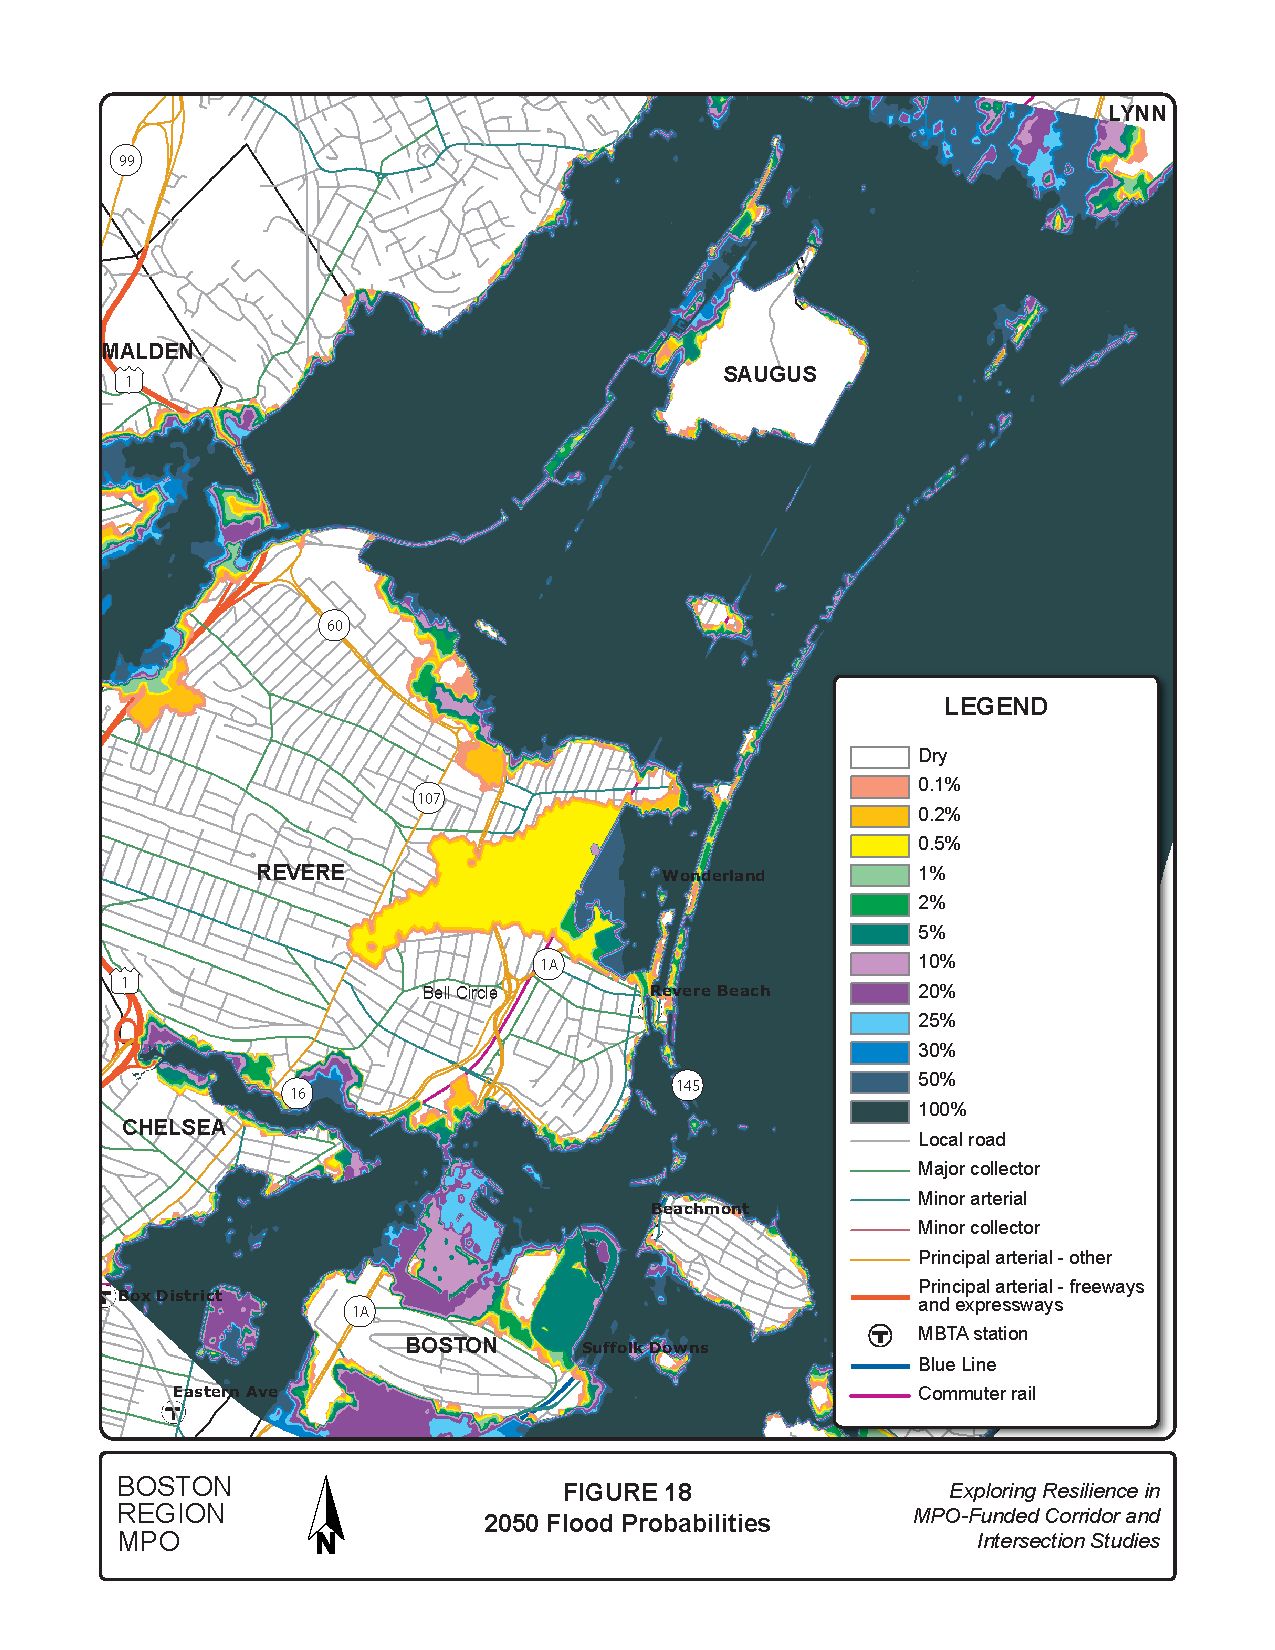 Figure 18 is a map of the study area showing the flood risk probabilities for 2050.